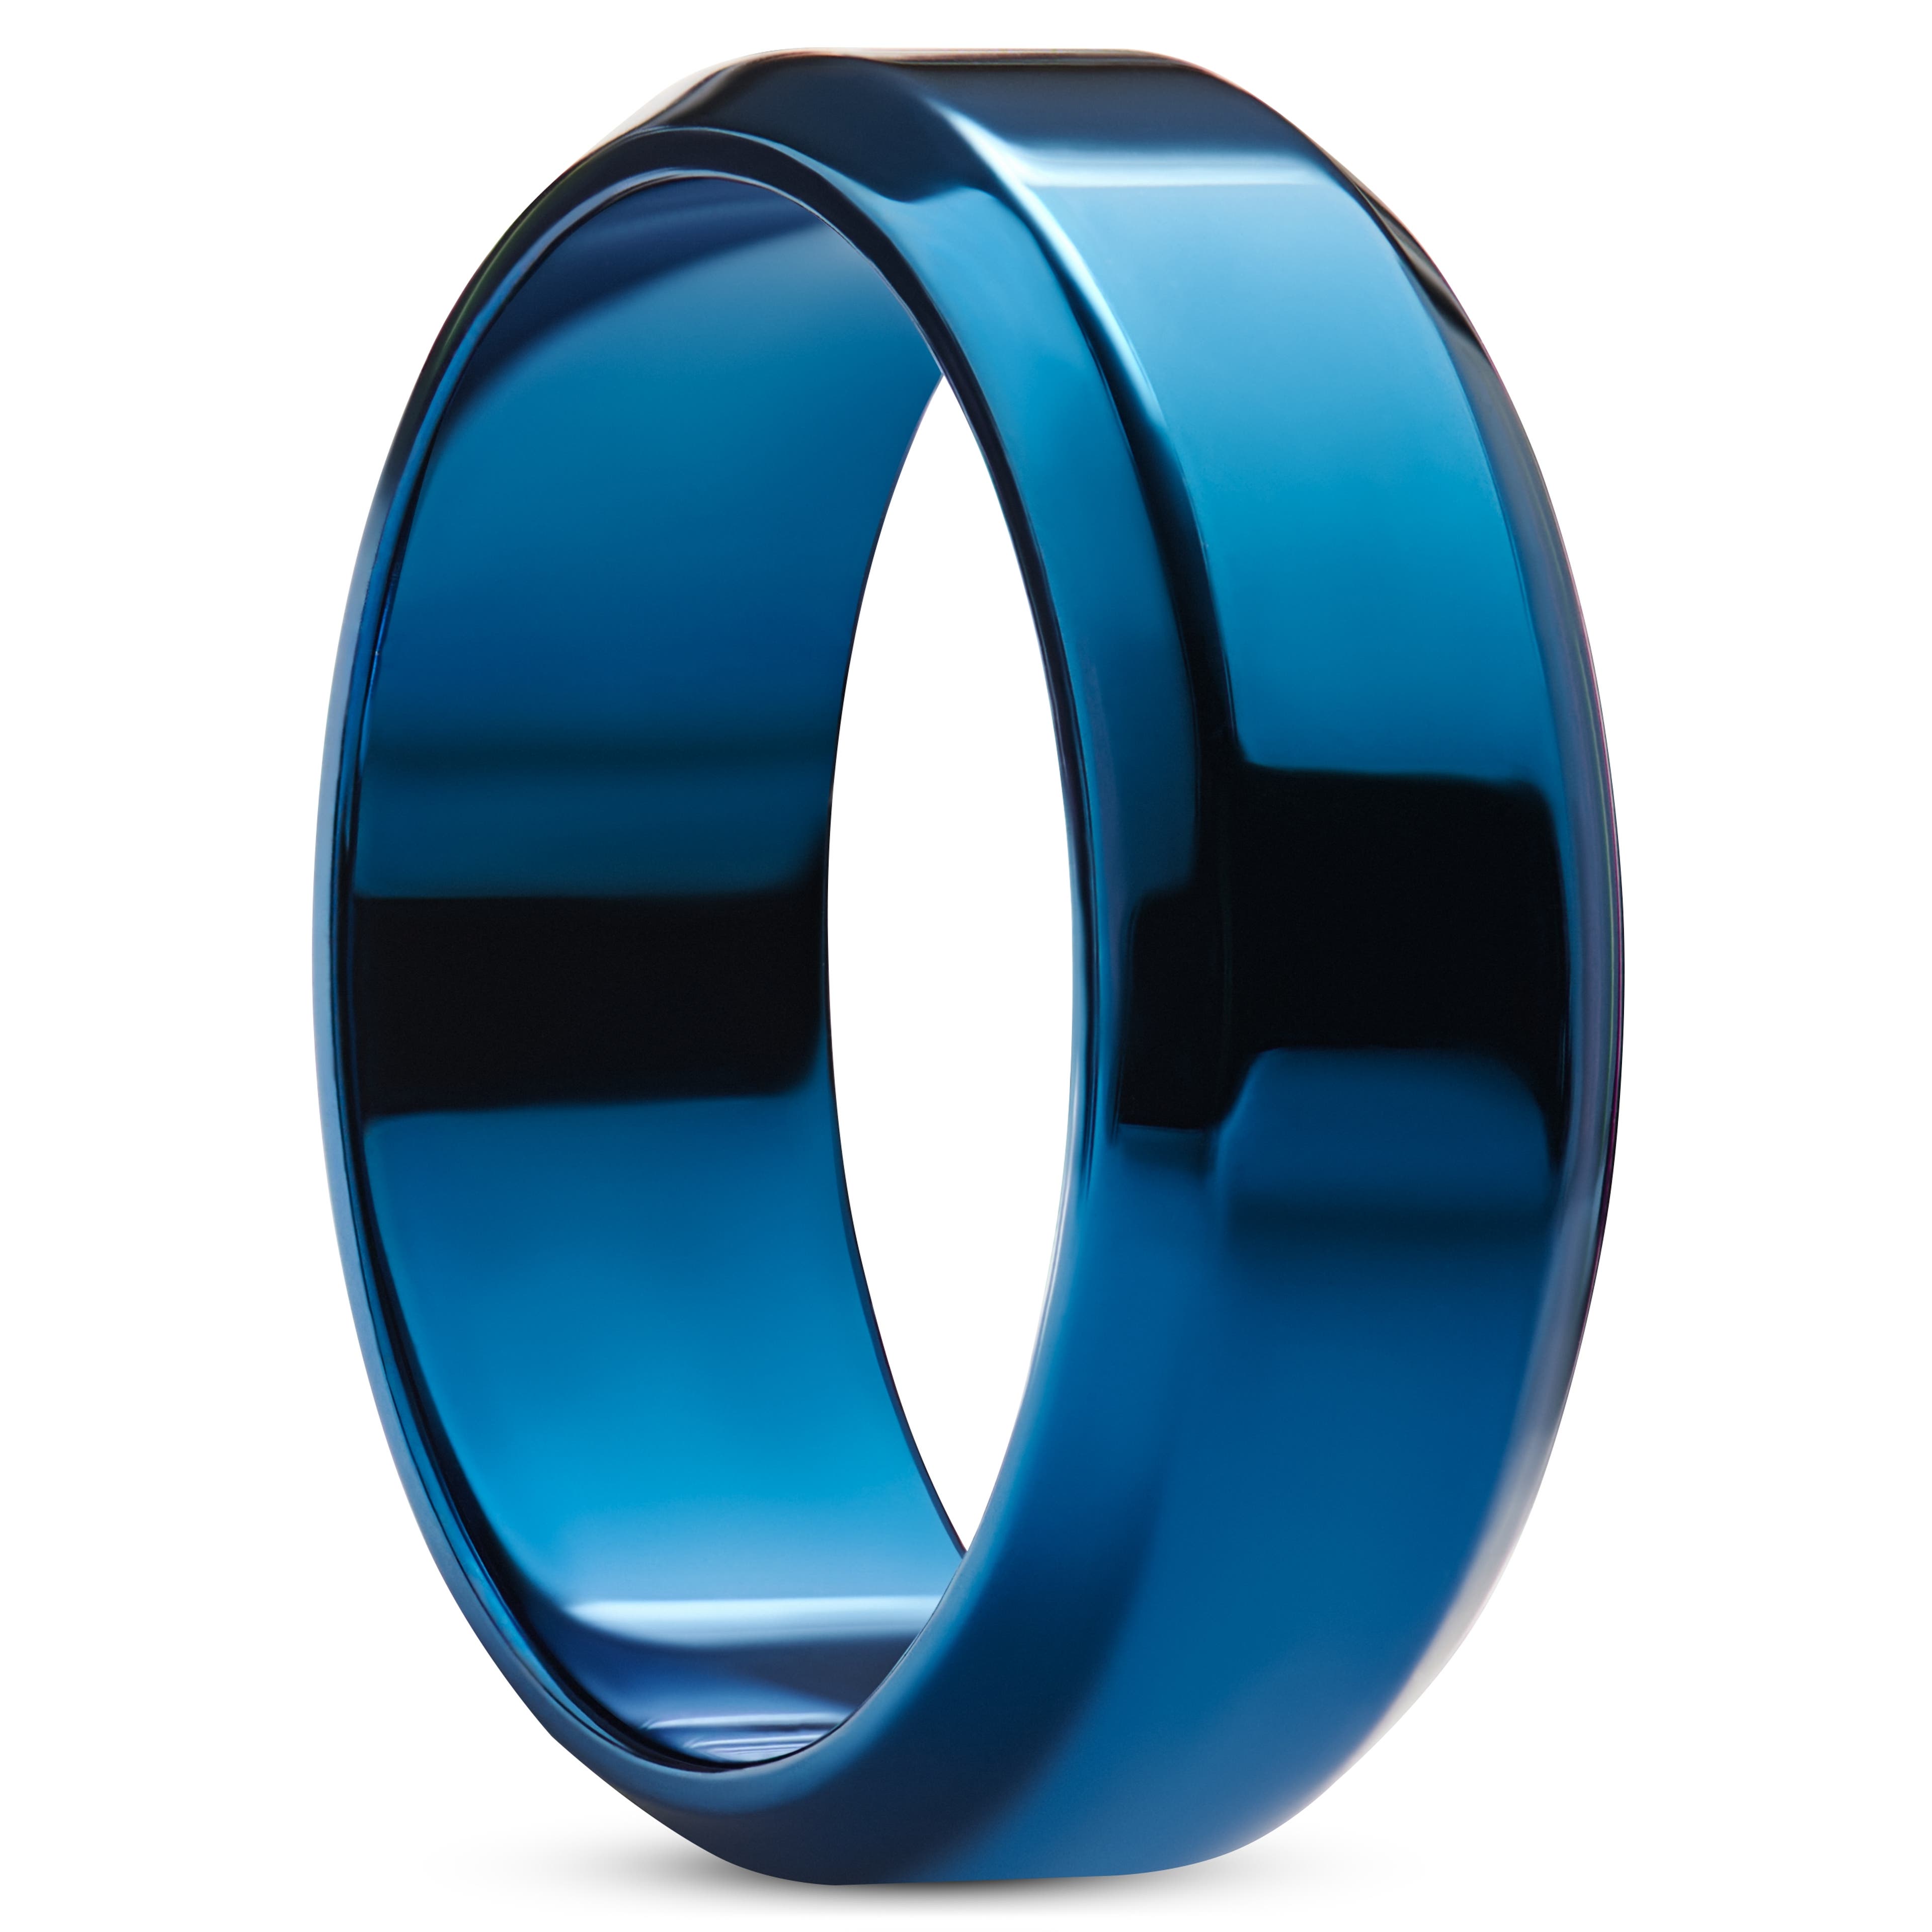 Ferrum | 8 mm Polished Blue Stainless Steel Bevelled Edge Ring